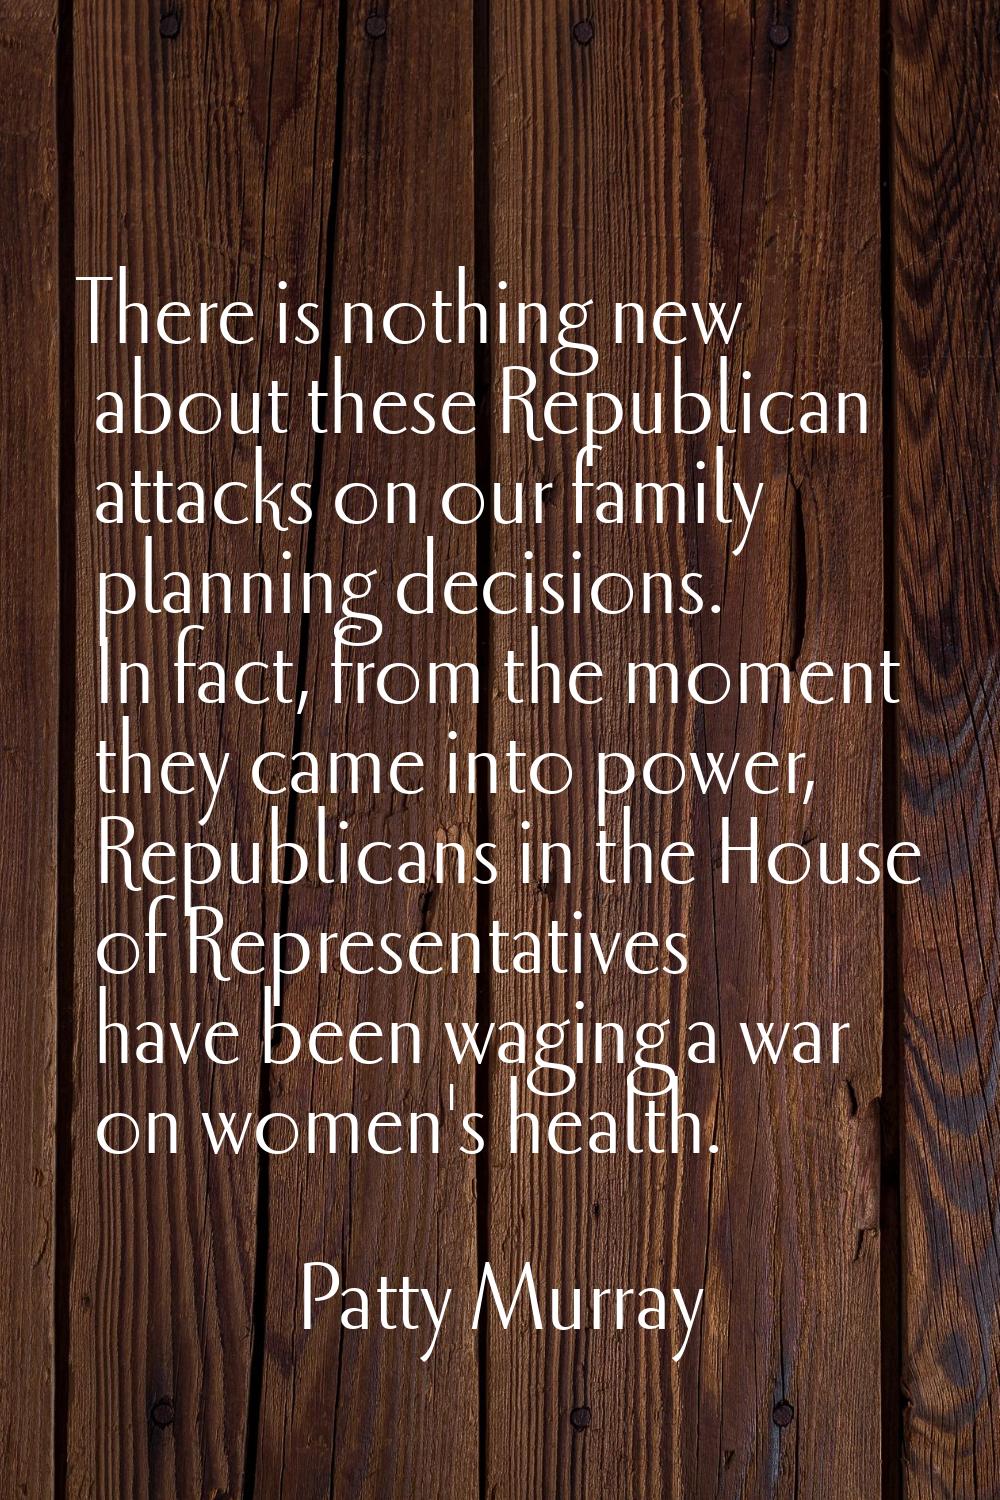 There is nothing new about these Republican attacks on our family planning decisions. In fact, from